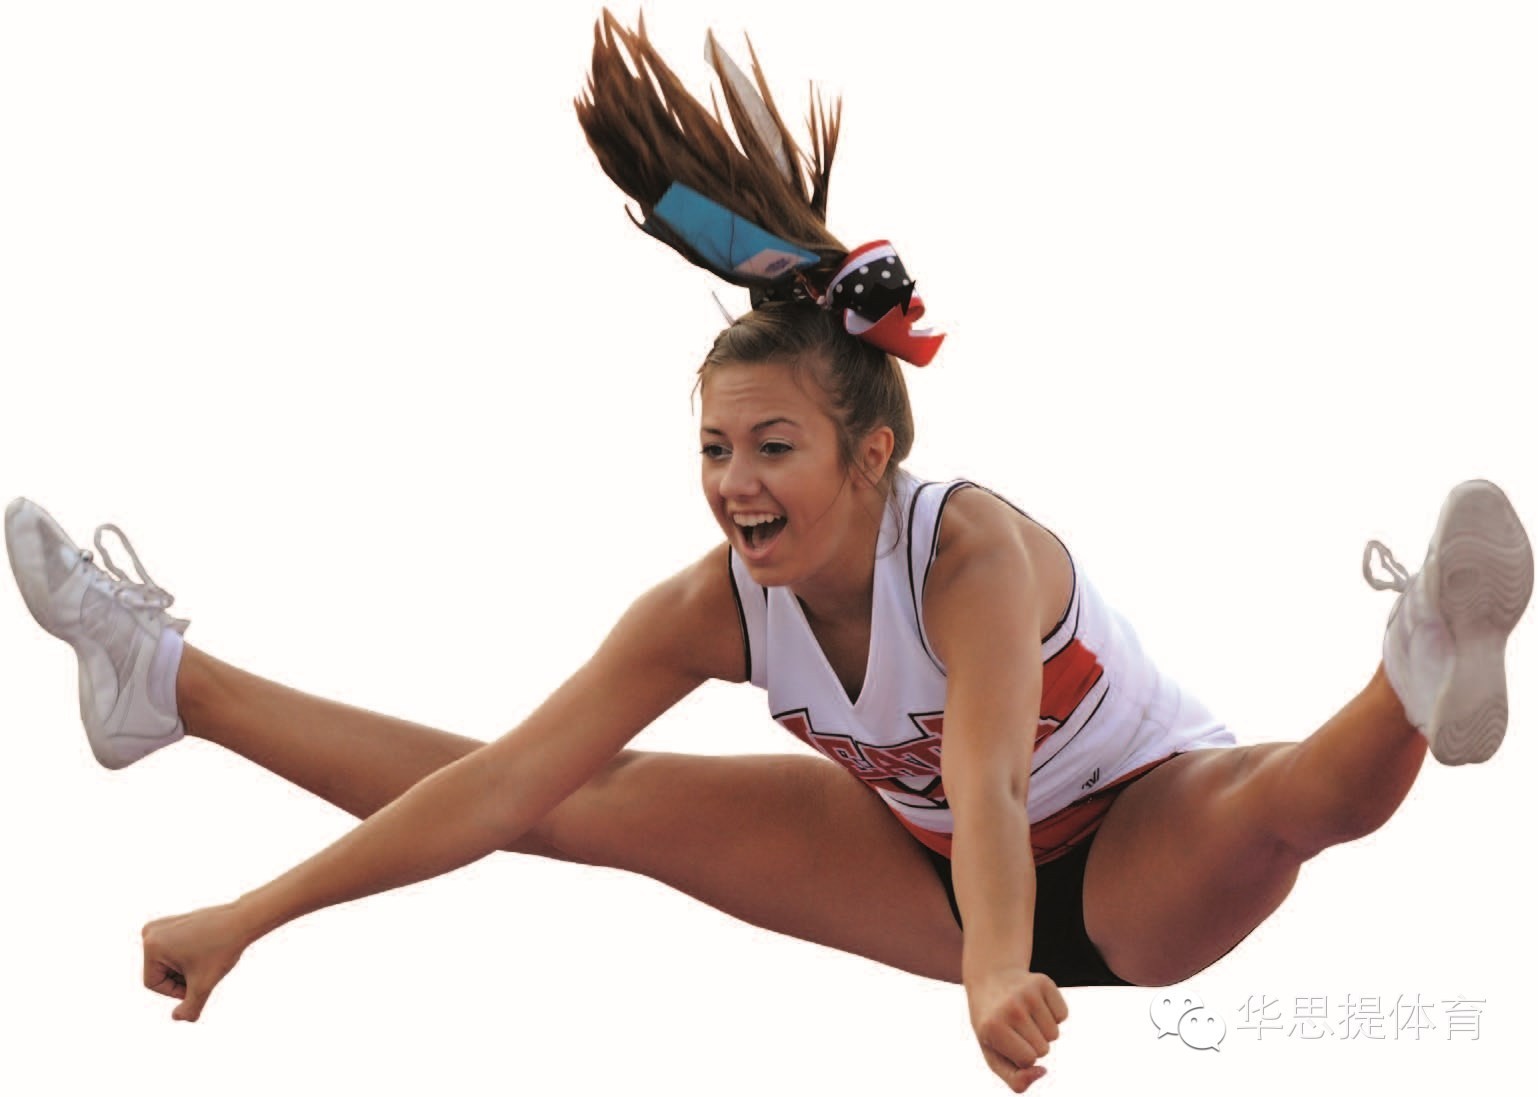 How to Improve Your Toe Touch